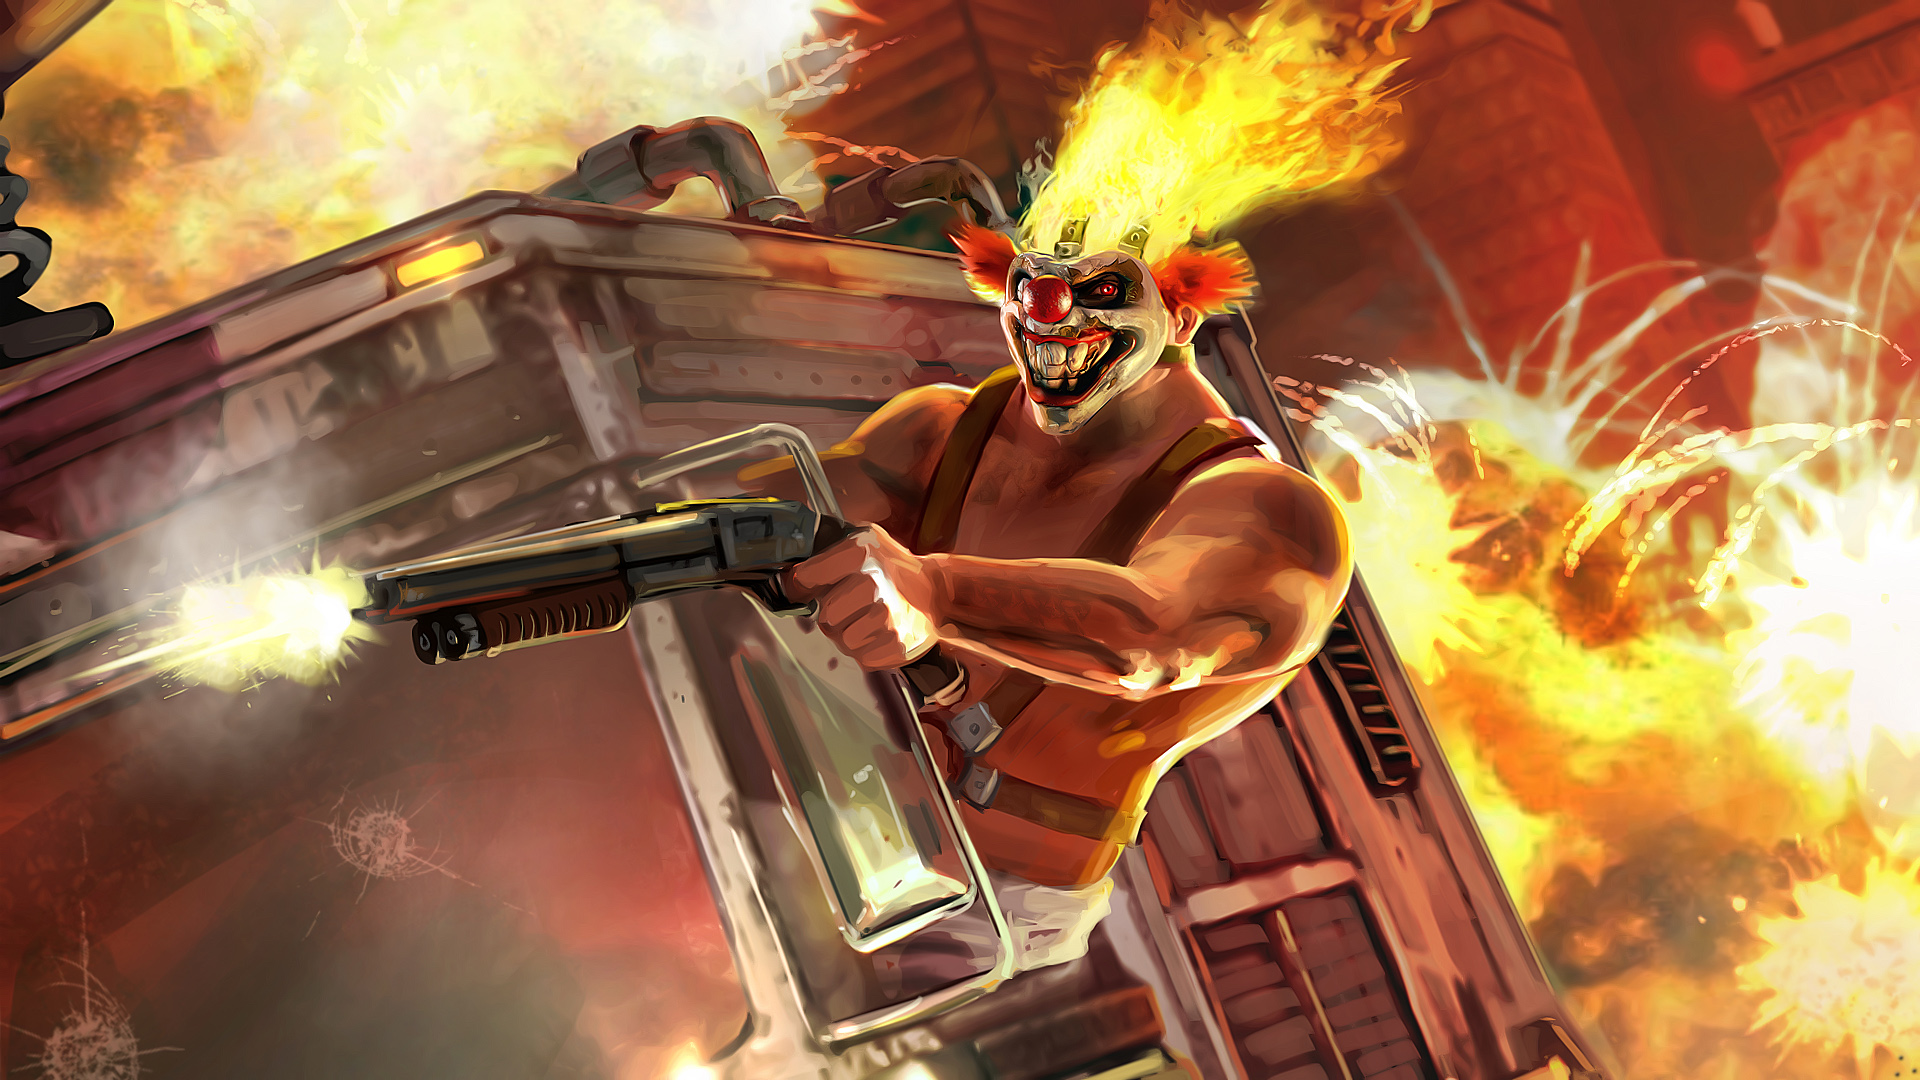 HQ Twisted Metal Wallpapers | File 765.59Kb